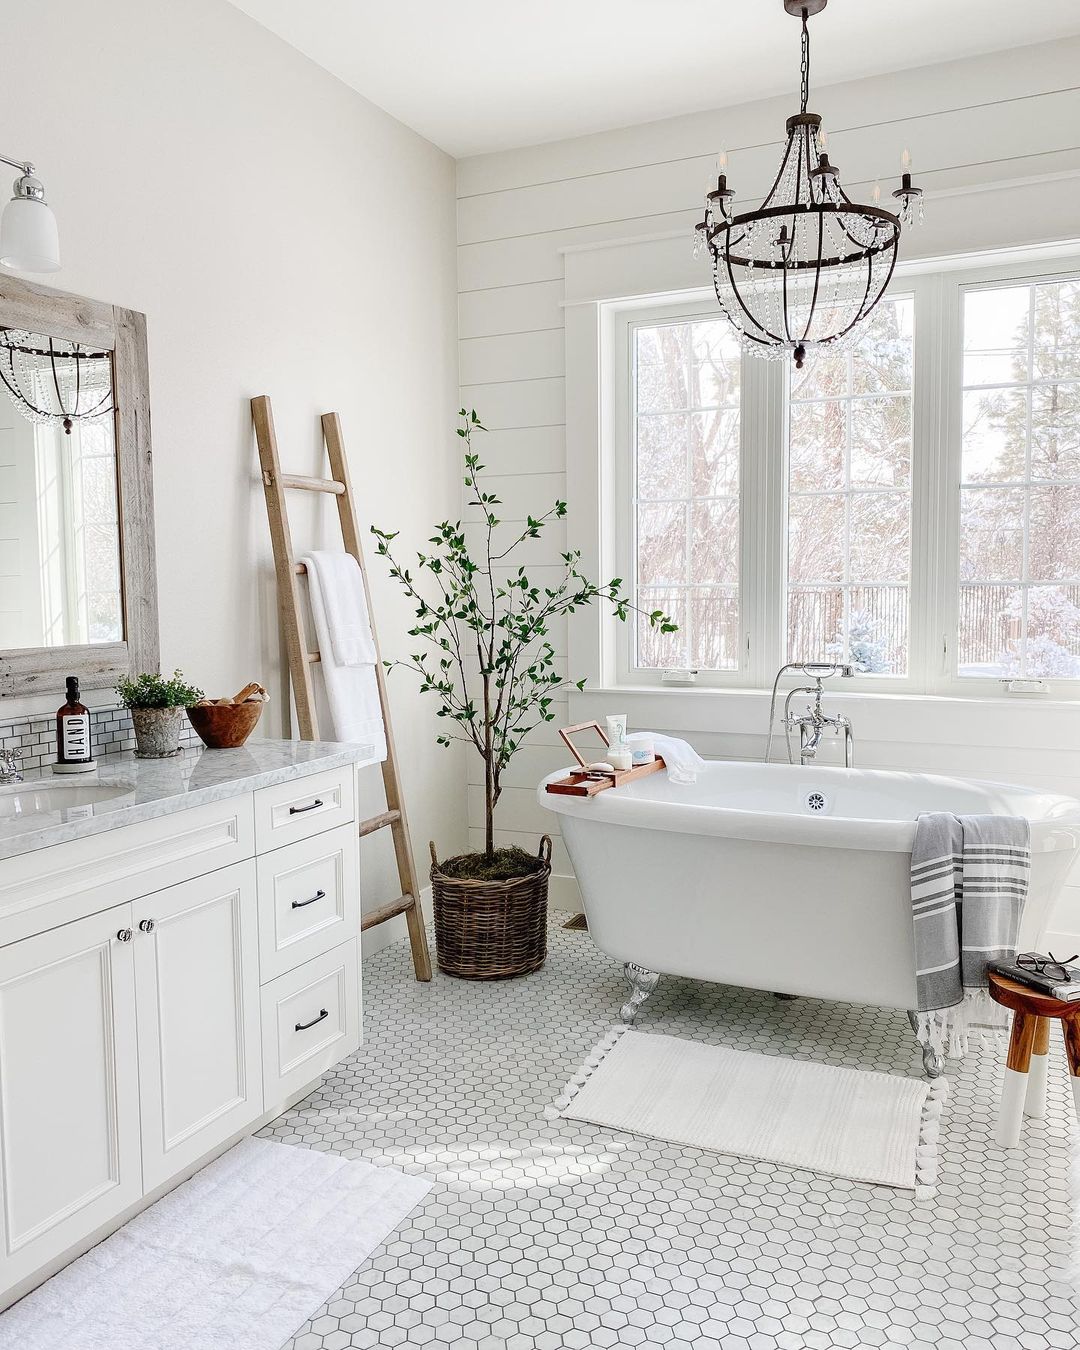 Refinished Bathroom with Shiplap Wall and Clawfoot Tub. Photo by Instagram user @houseofmurphy